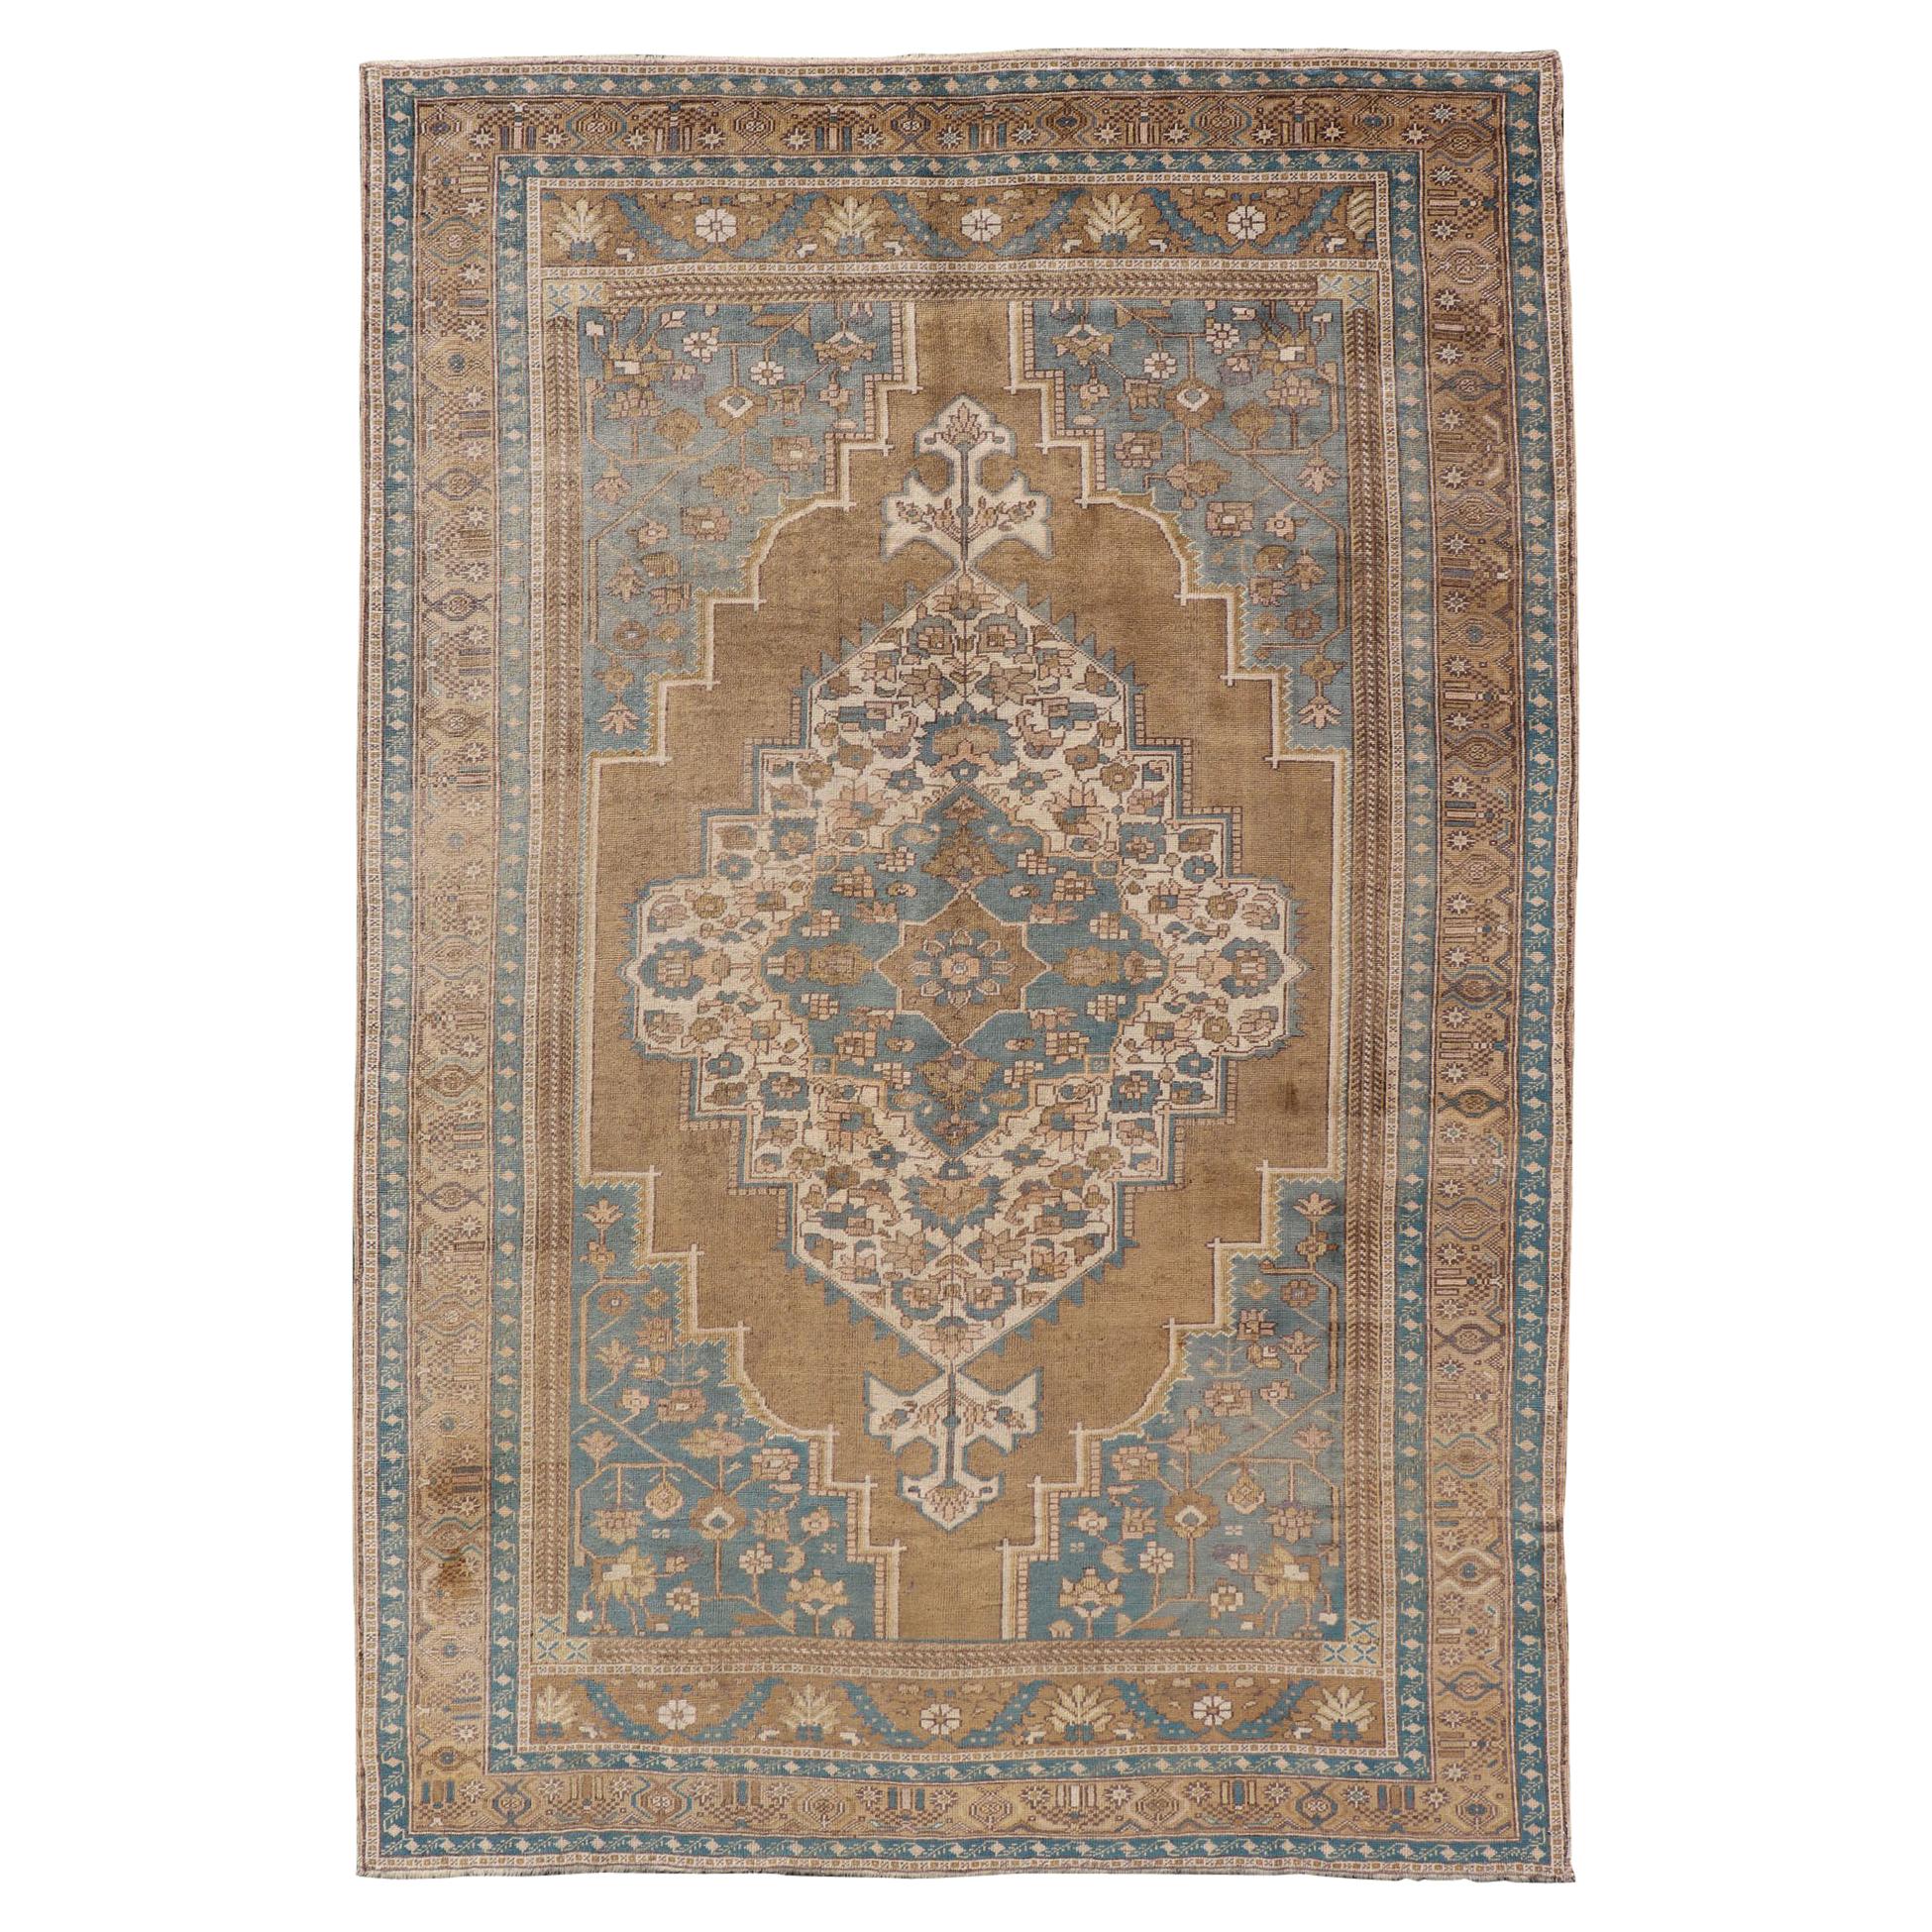 Turkish Oushak Vintage Carpet from Turkey in Golden Brown and Blue Tones